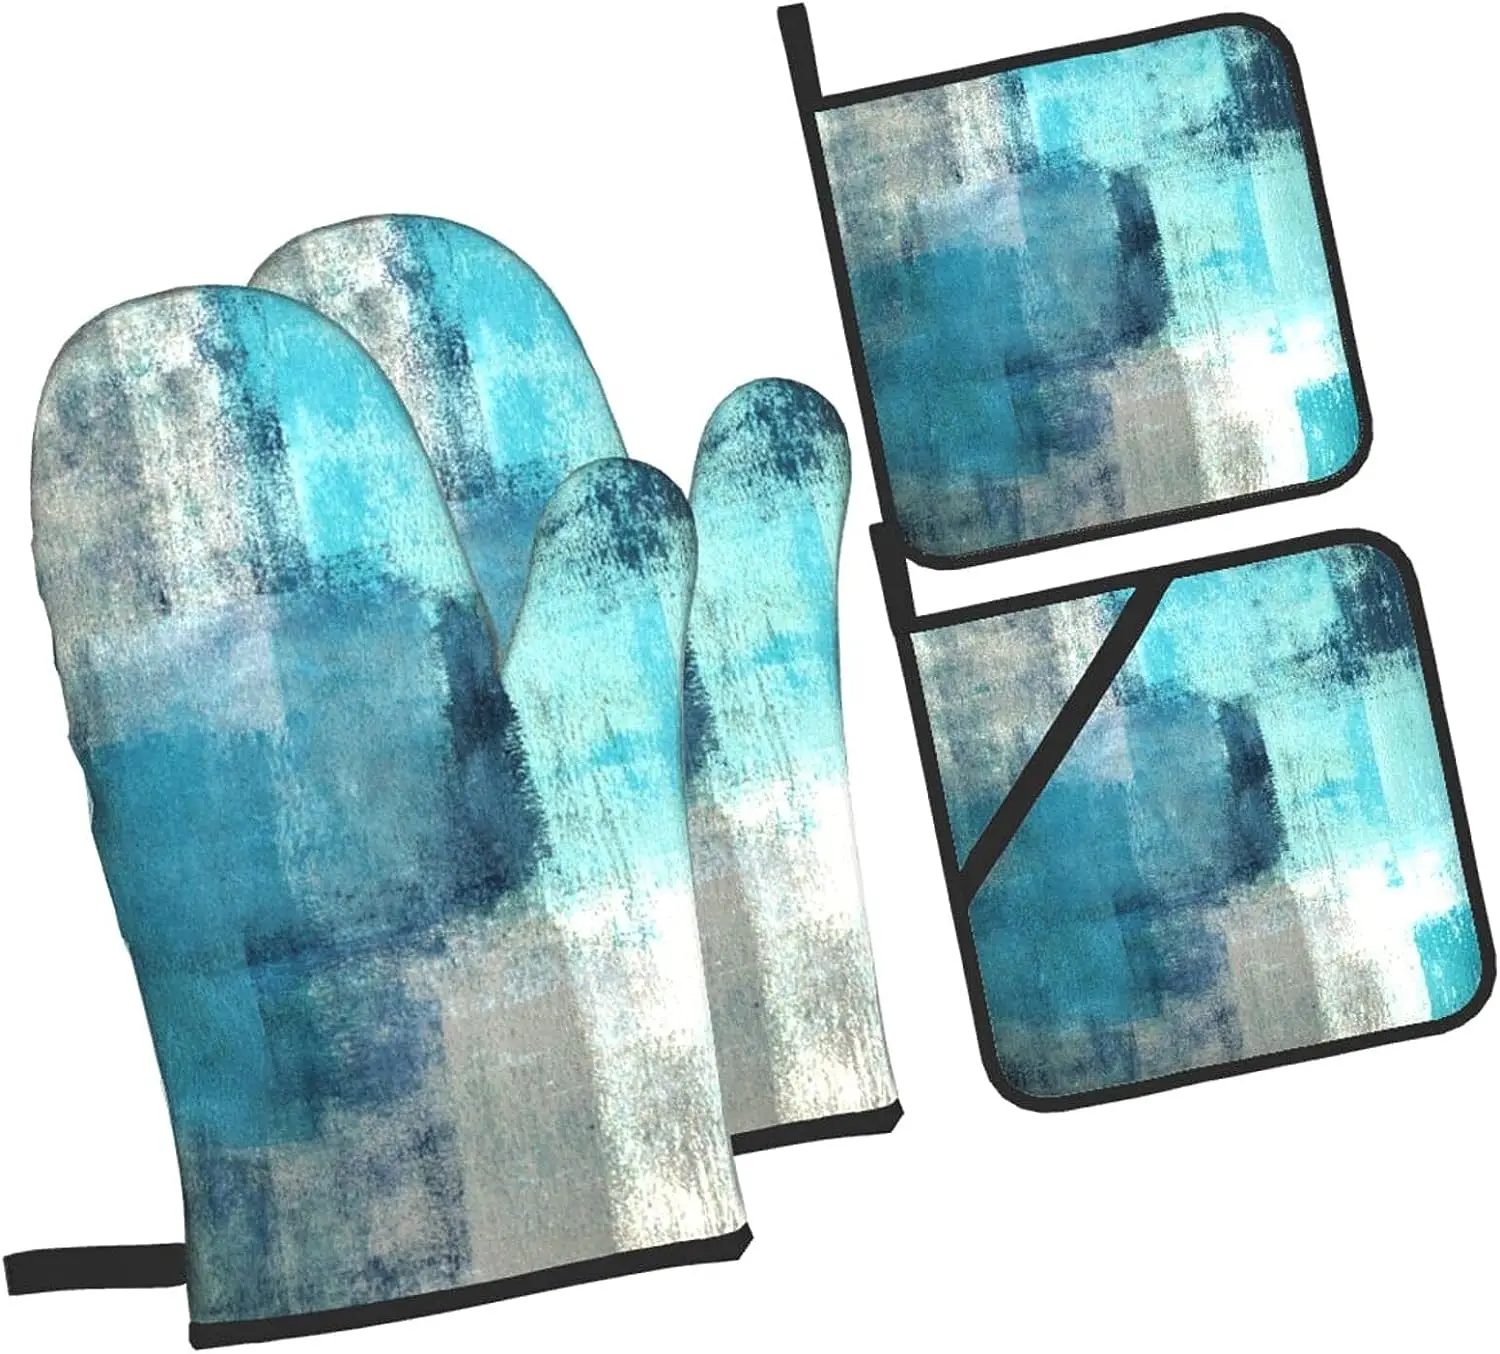 

Oven Mitts and Pot Holders Sets of 4 Modern Art Gry Turquoise Abstract Kitchen Potholder Gloves Heat Resistant Non-Slip for Chef